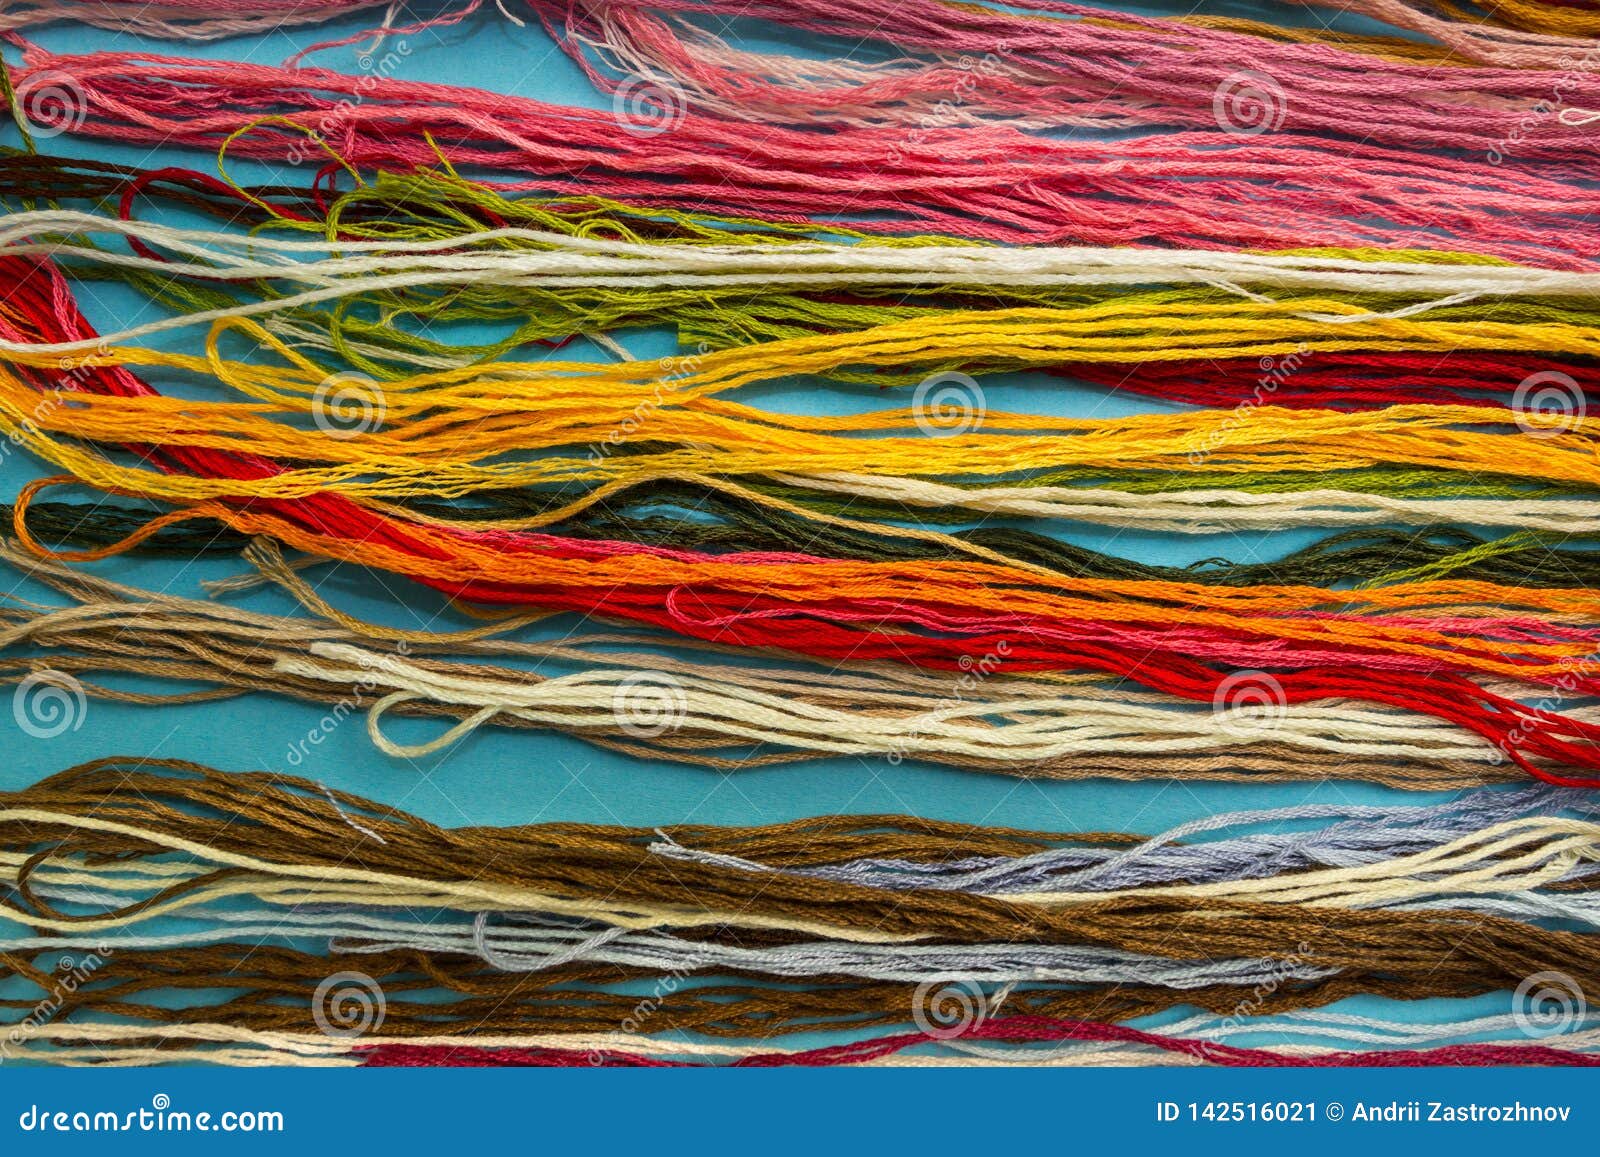 Parallel Colorful Cotton Embroidery Floss Background, Threads for ...